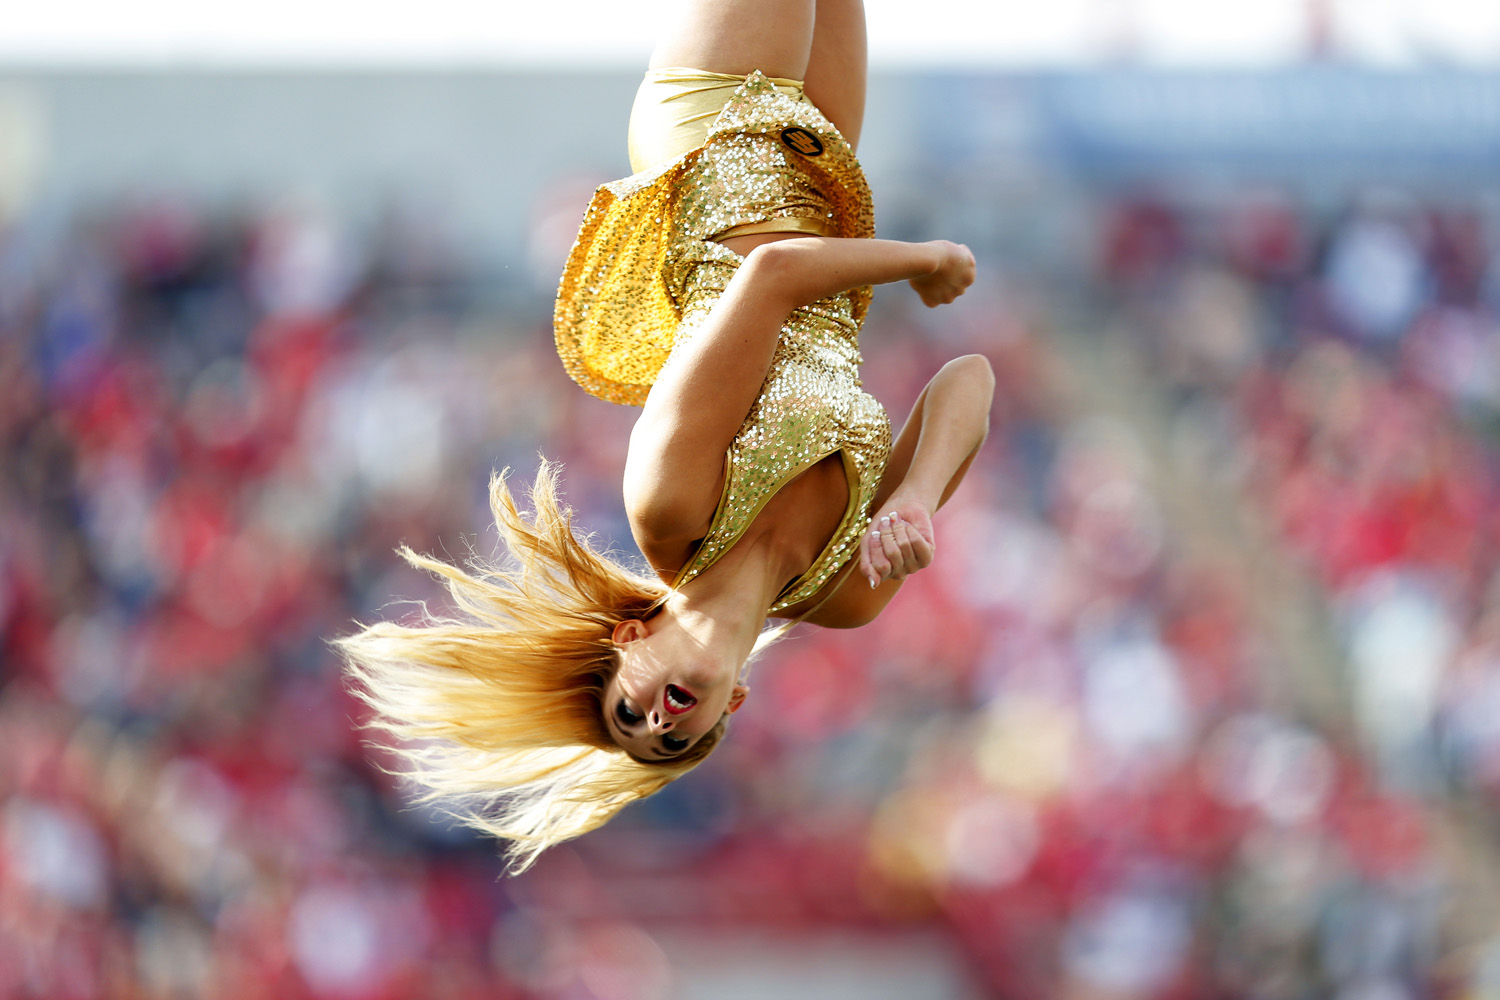 A cheerleader for the Edmonton Eskimos goes flying through the air while during the match against Calgary Stampeders in Calgary, Canada on Sept. 1, 2014.